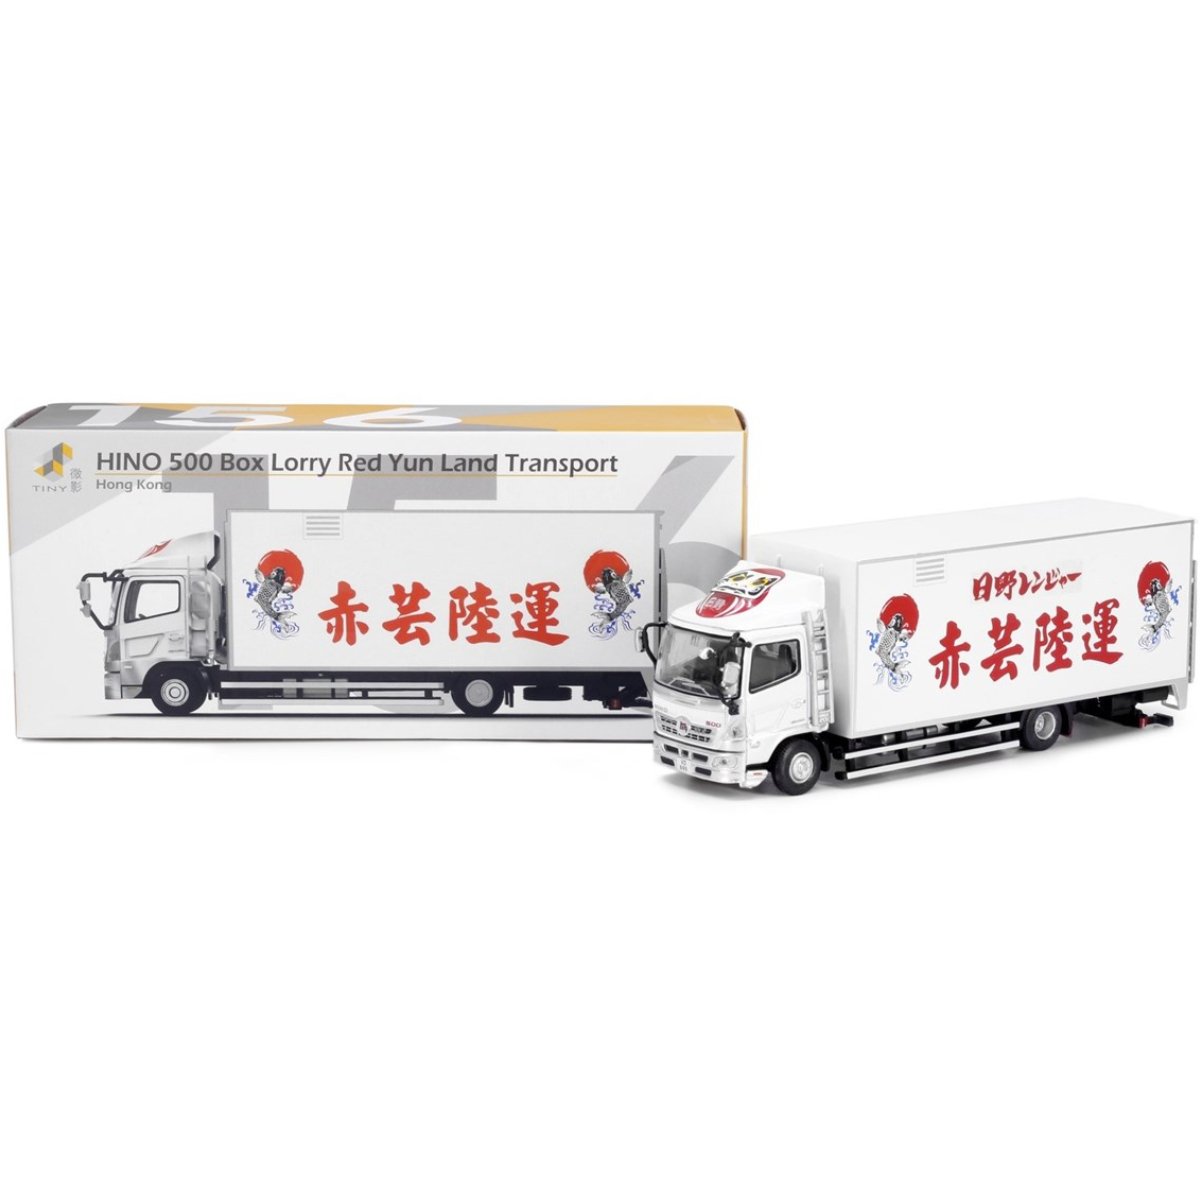 Tiny Models Hino 500 Box Lorry - Red Yun Land Transport (1:76 Scale) - Phillips Hobbies